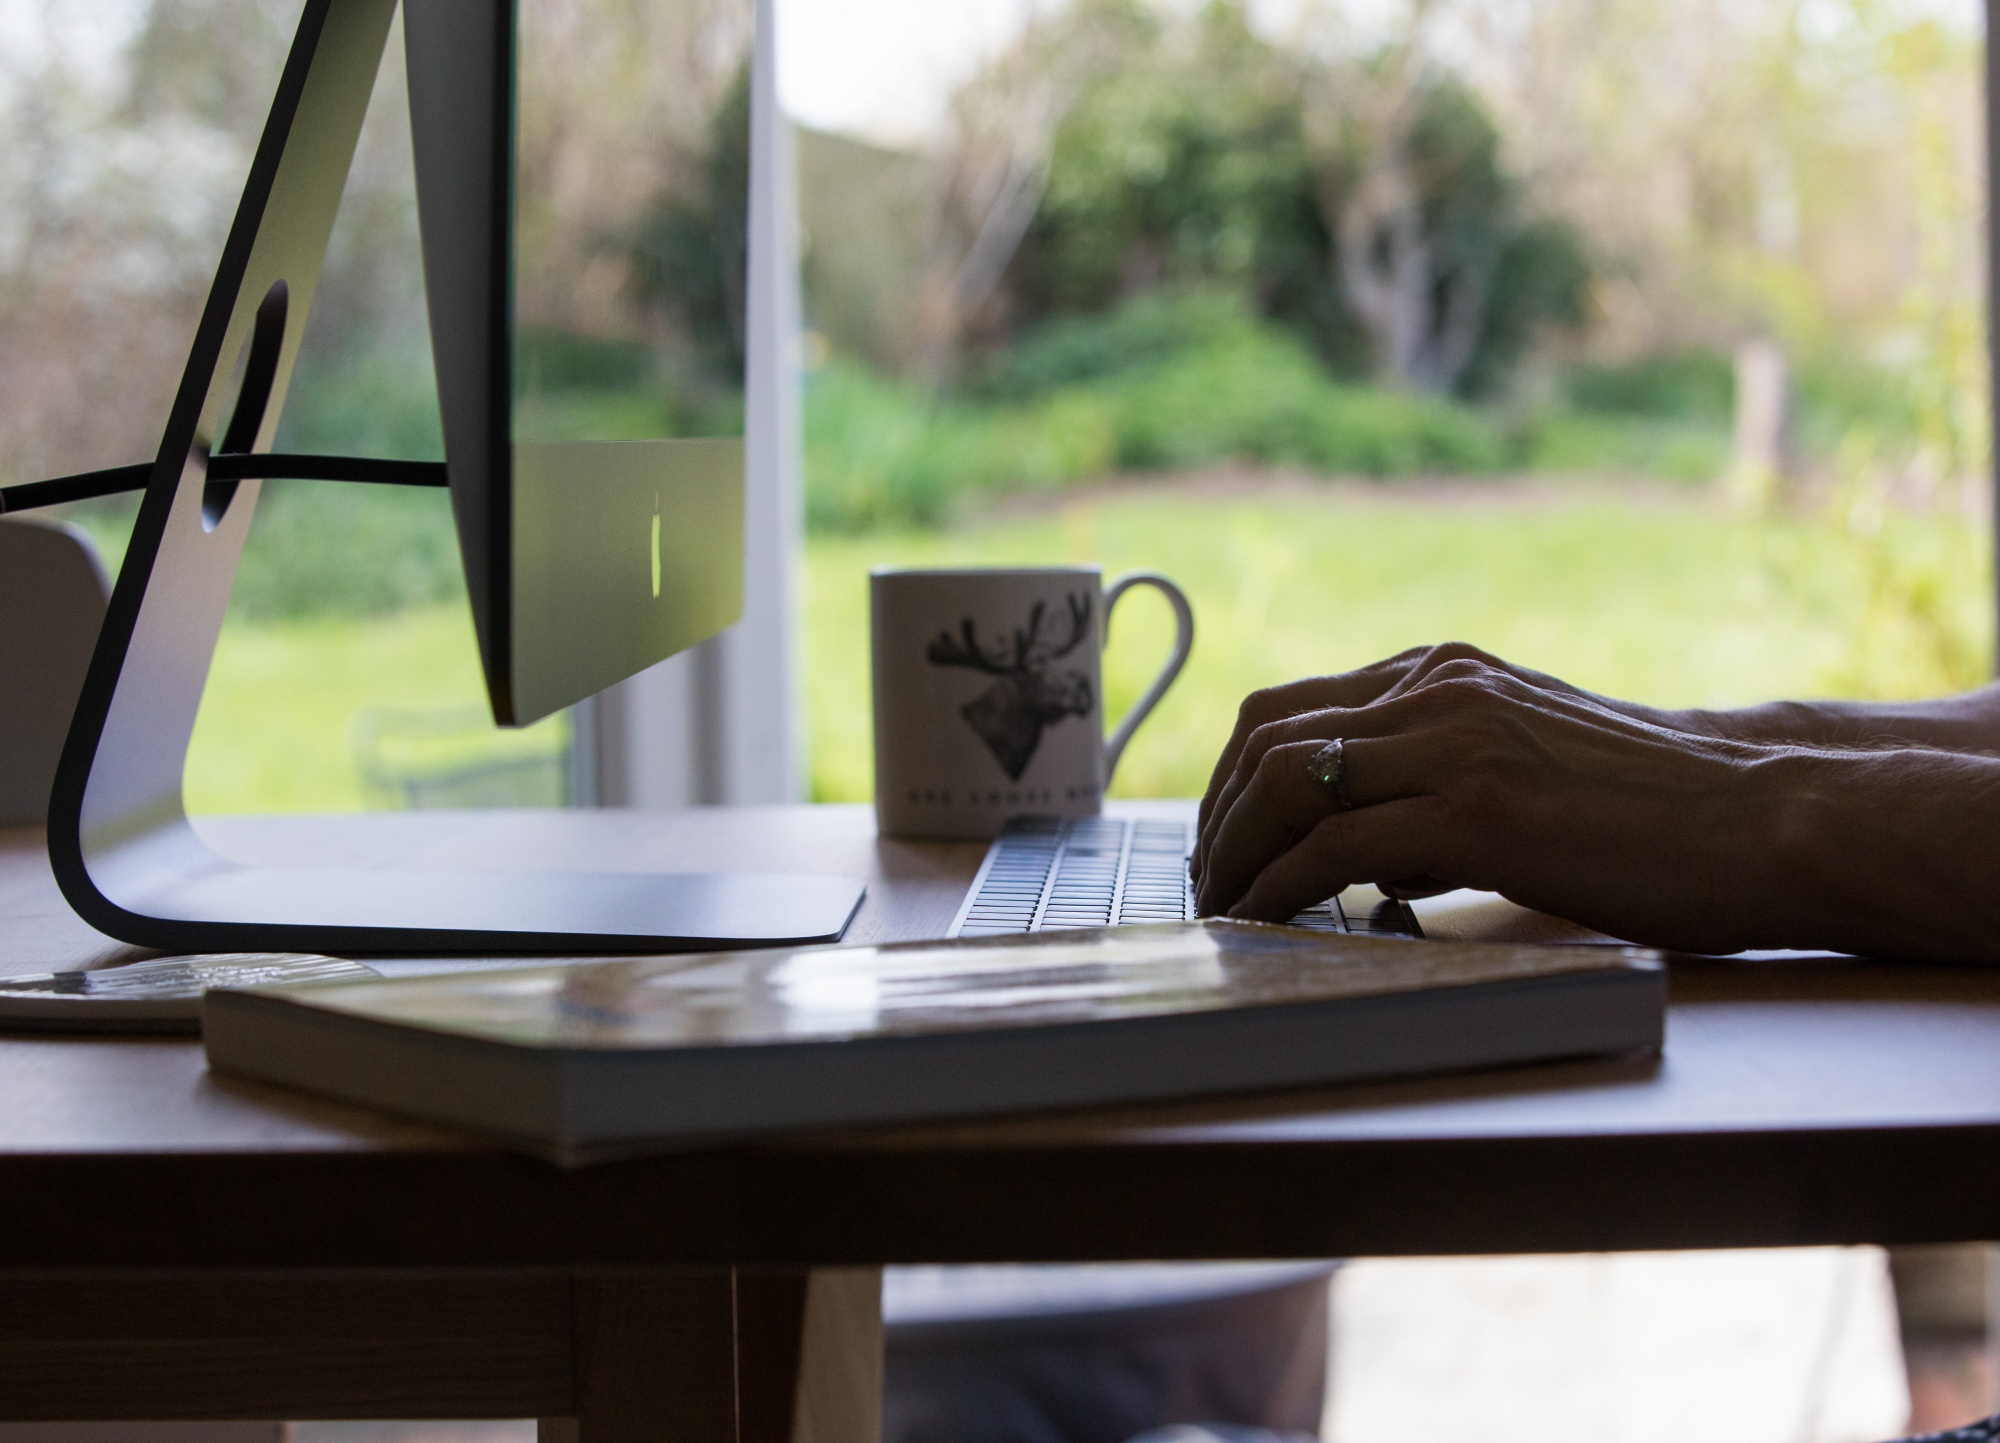 52% of People Want Work-From-Home Jobs for Better Work-Life